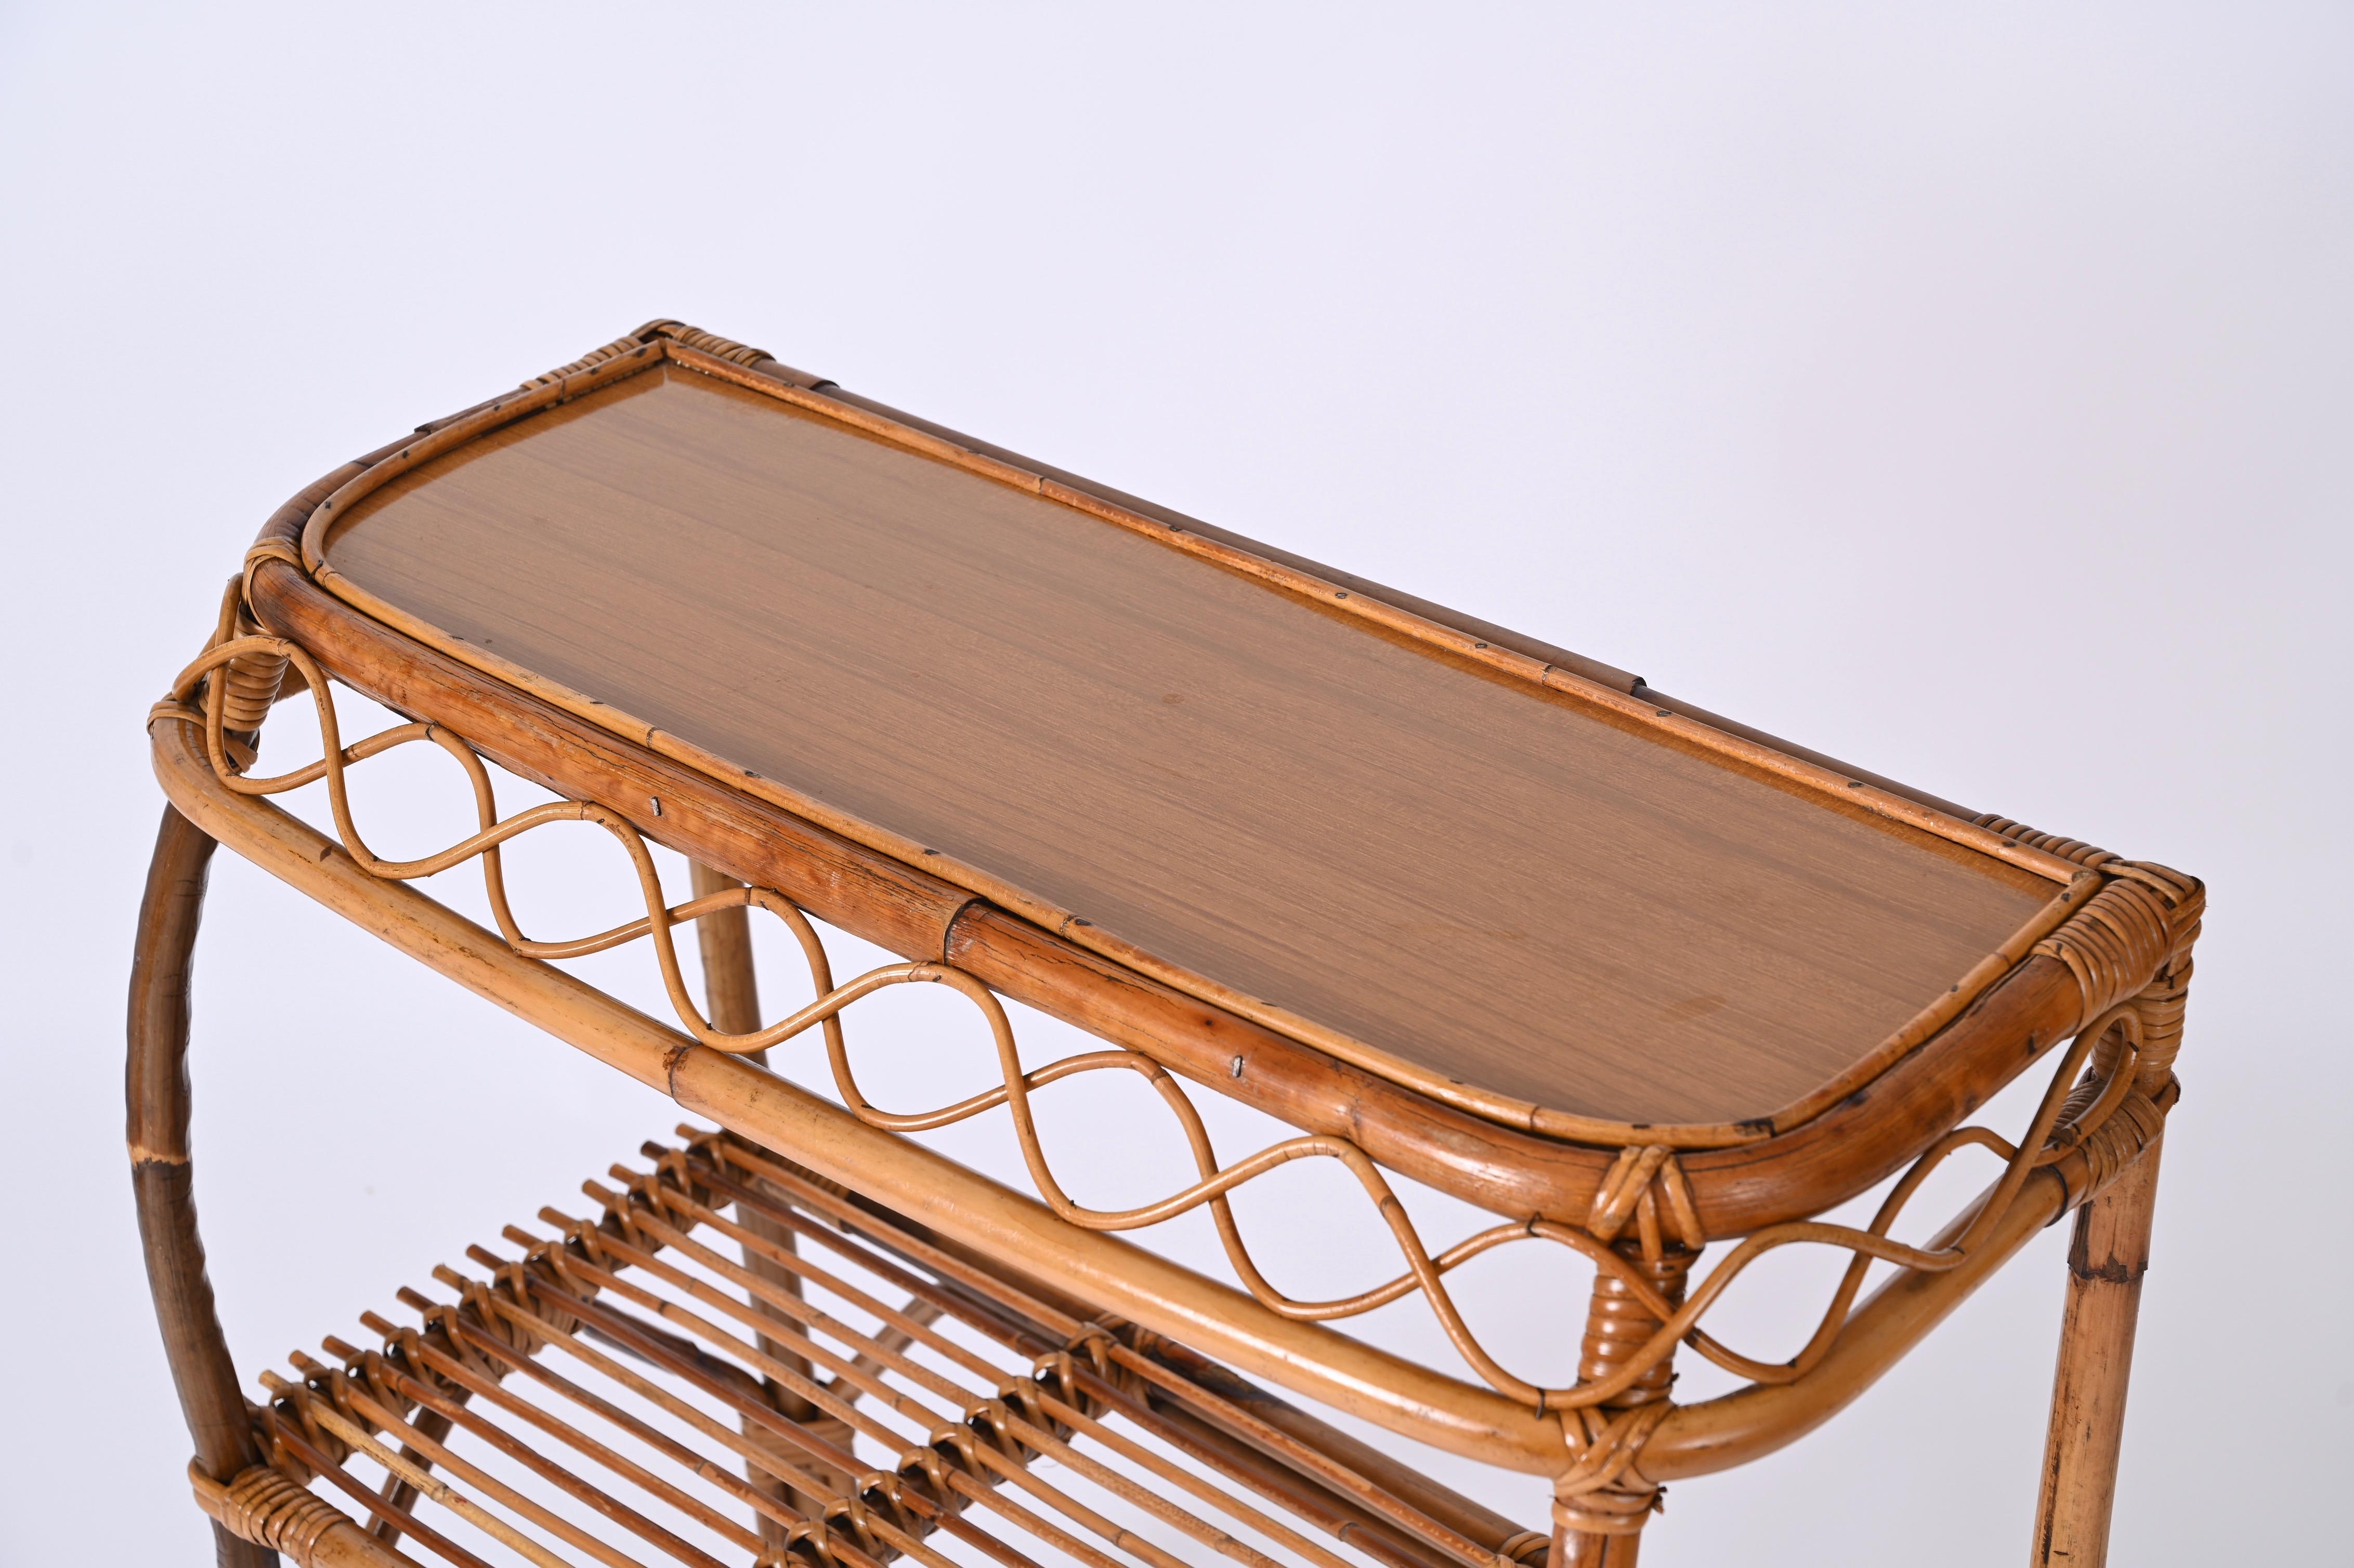 Midcentury Bamboo and Rattan Cocktail Console Table after Franco Albini, 1960s For Sale 5